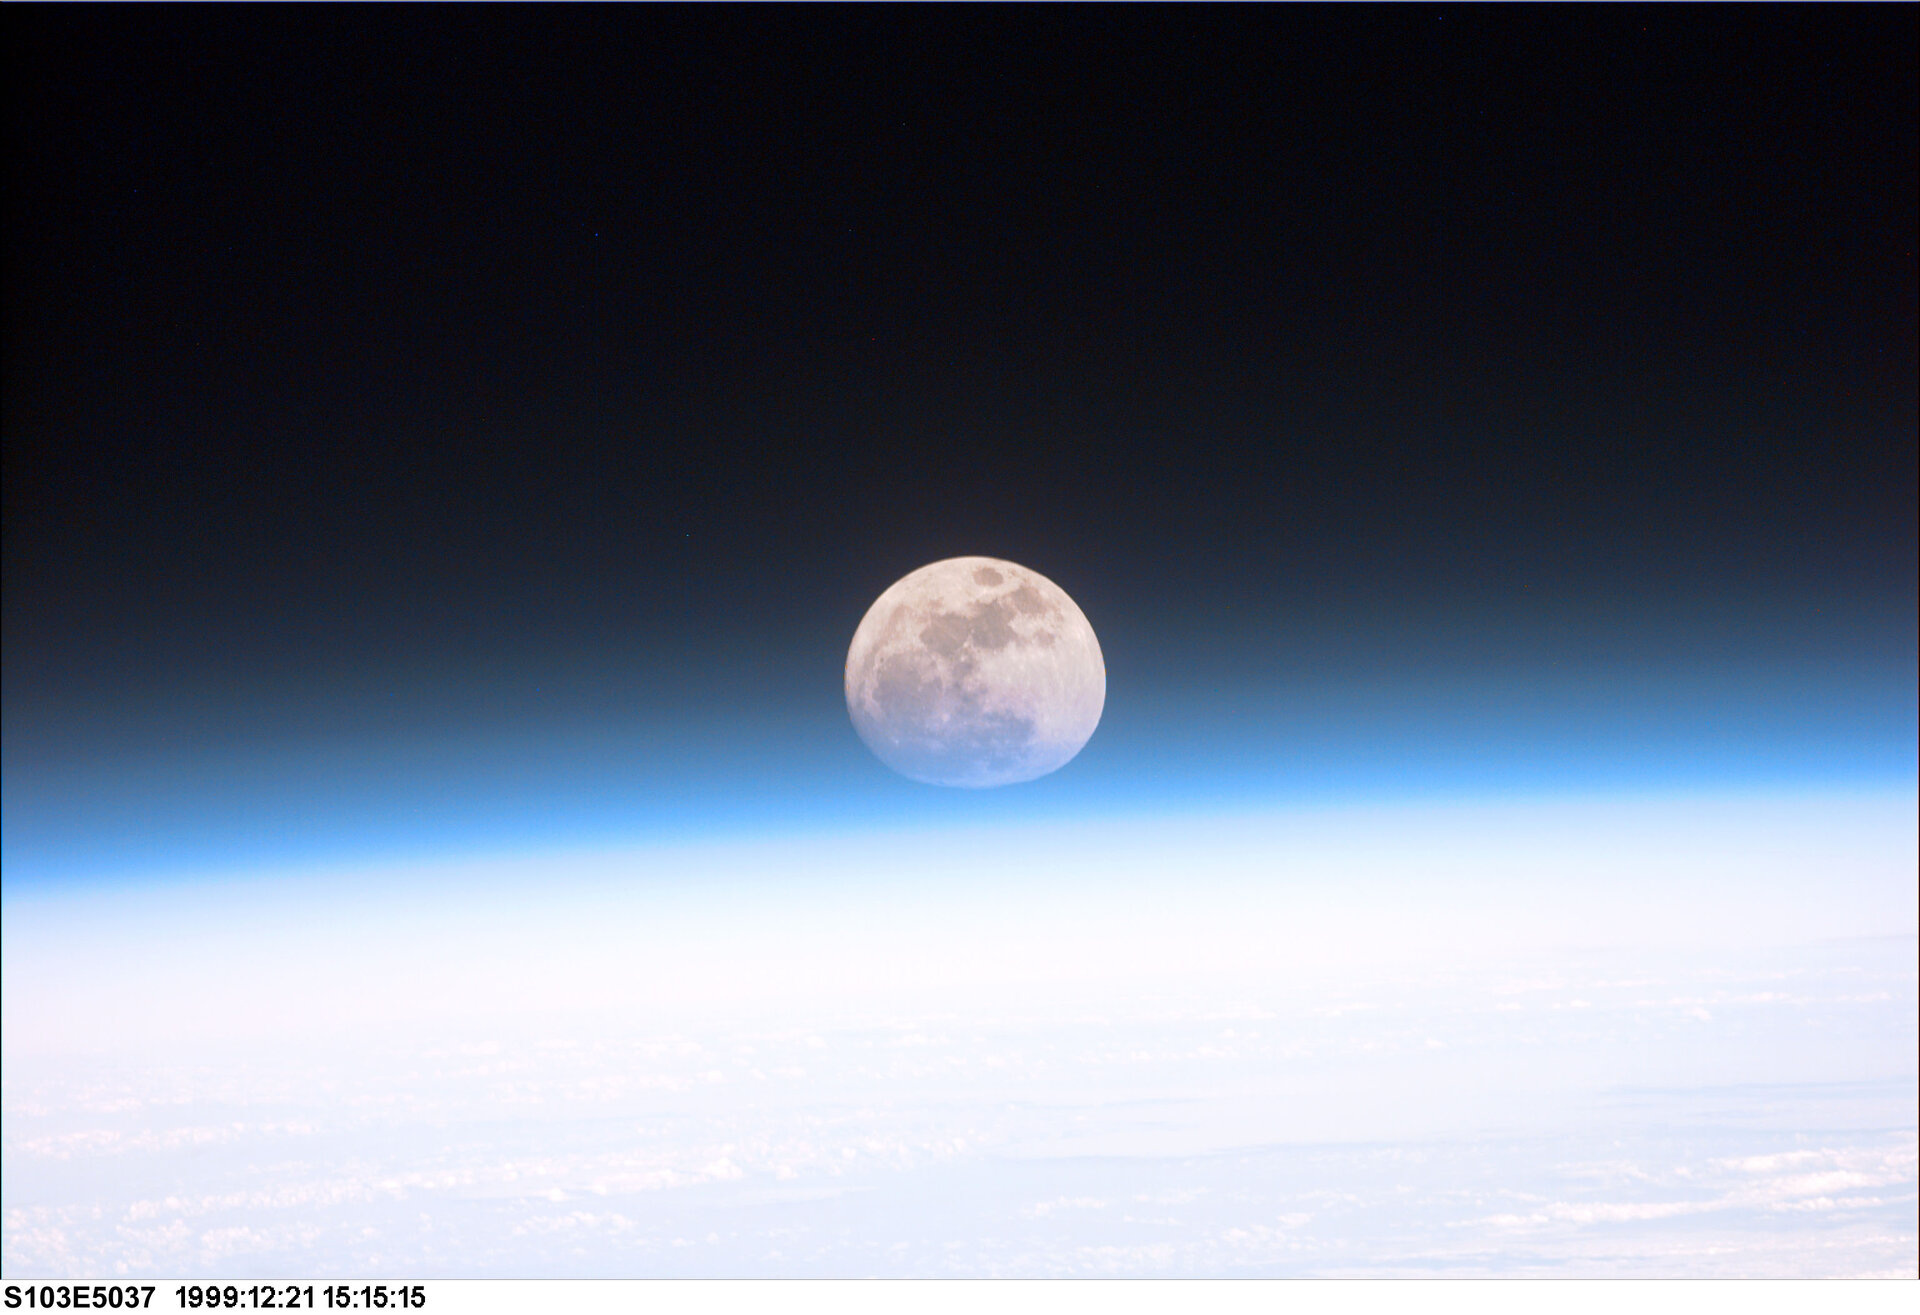 Space Shuttle Discovery sees Earth's Moon